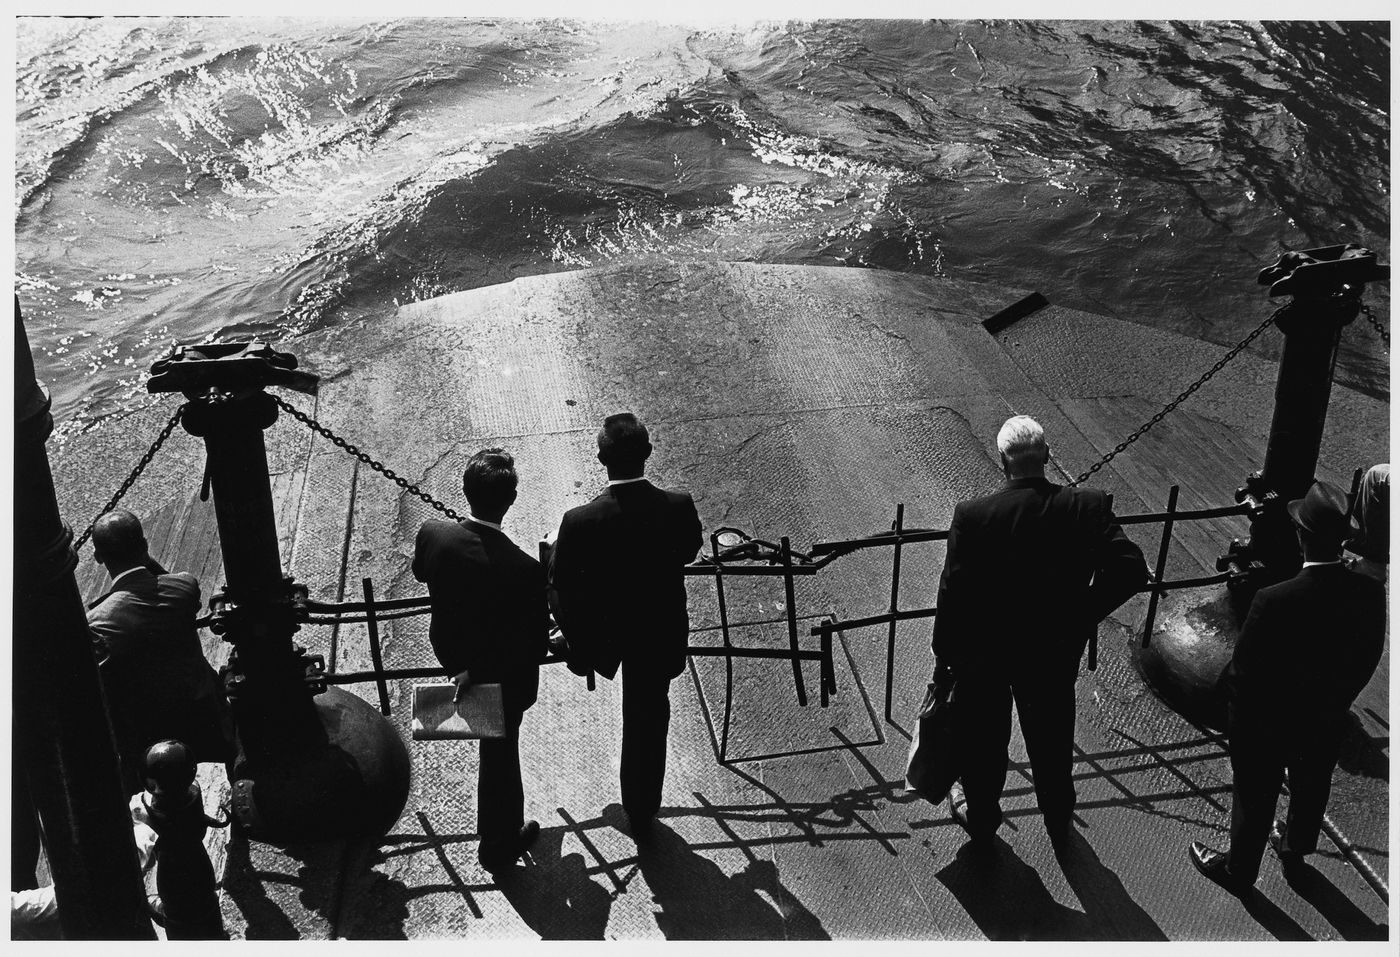 View of men standing on the deck of the Hoboken Ferry looking at the water